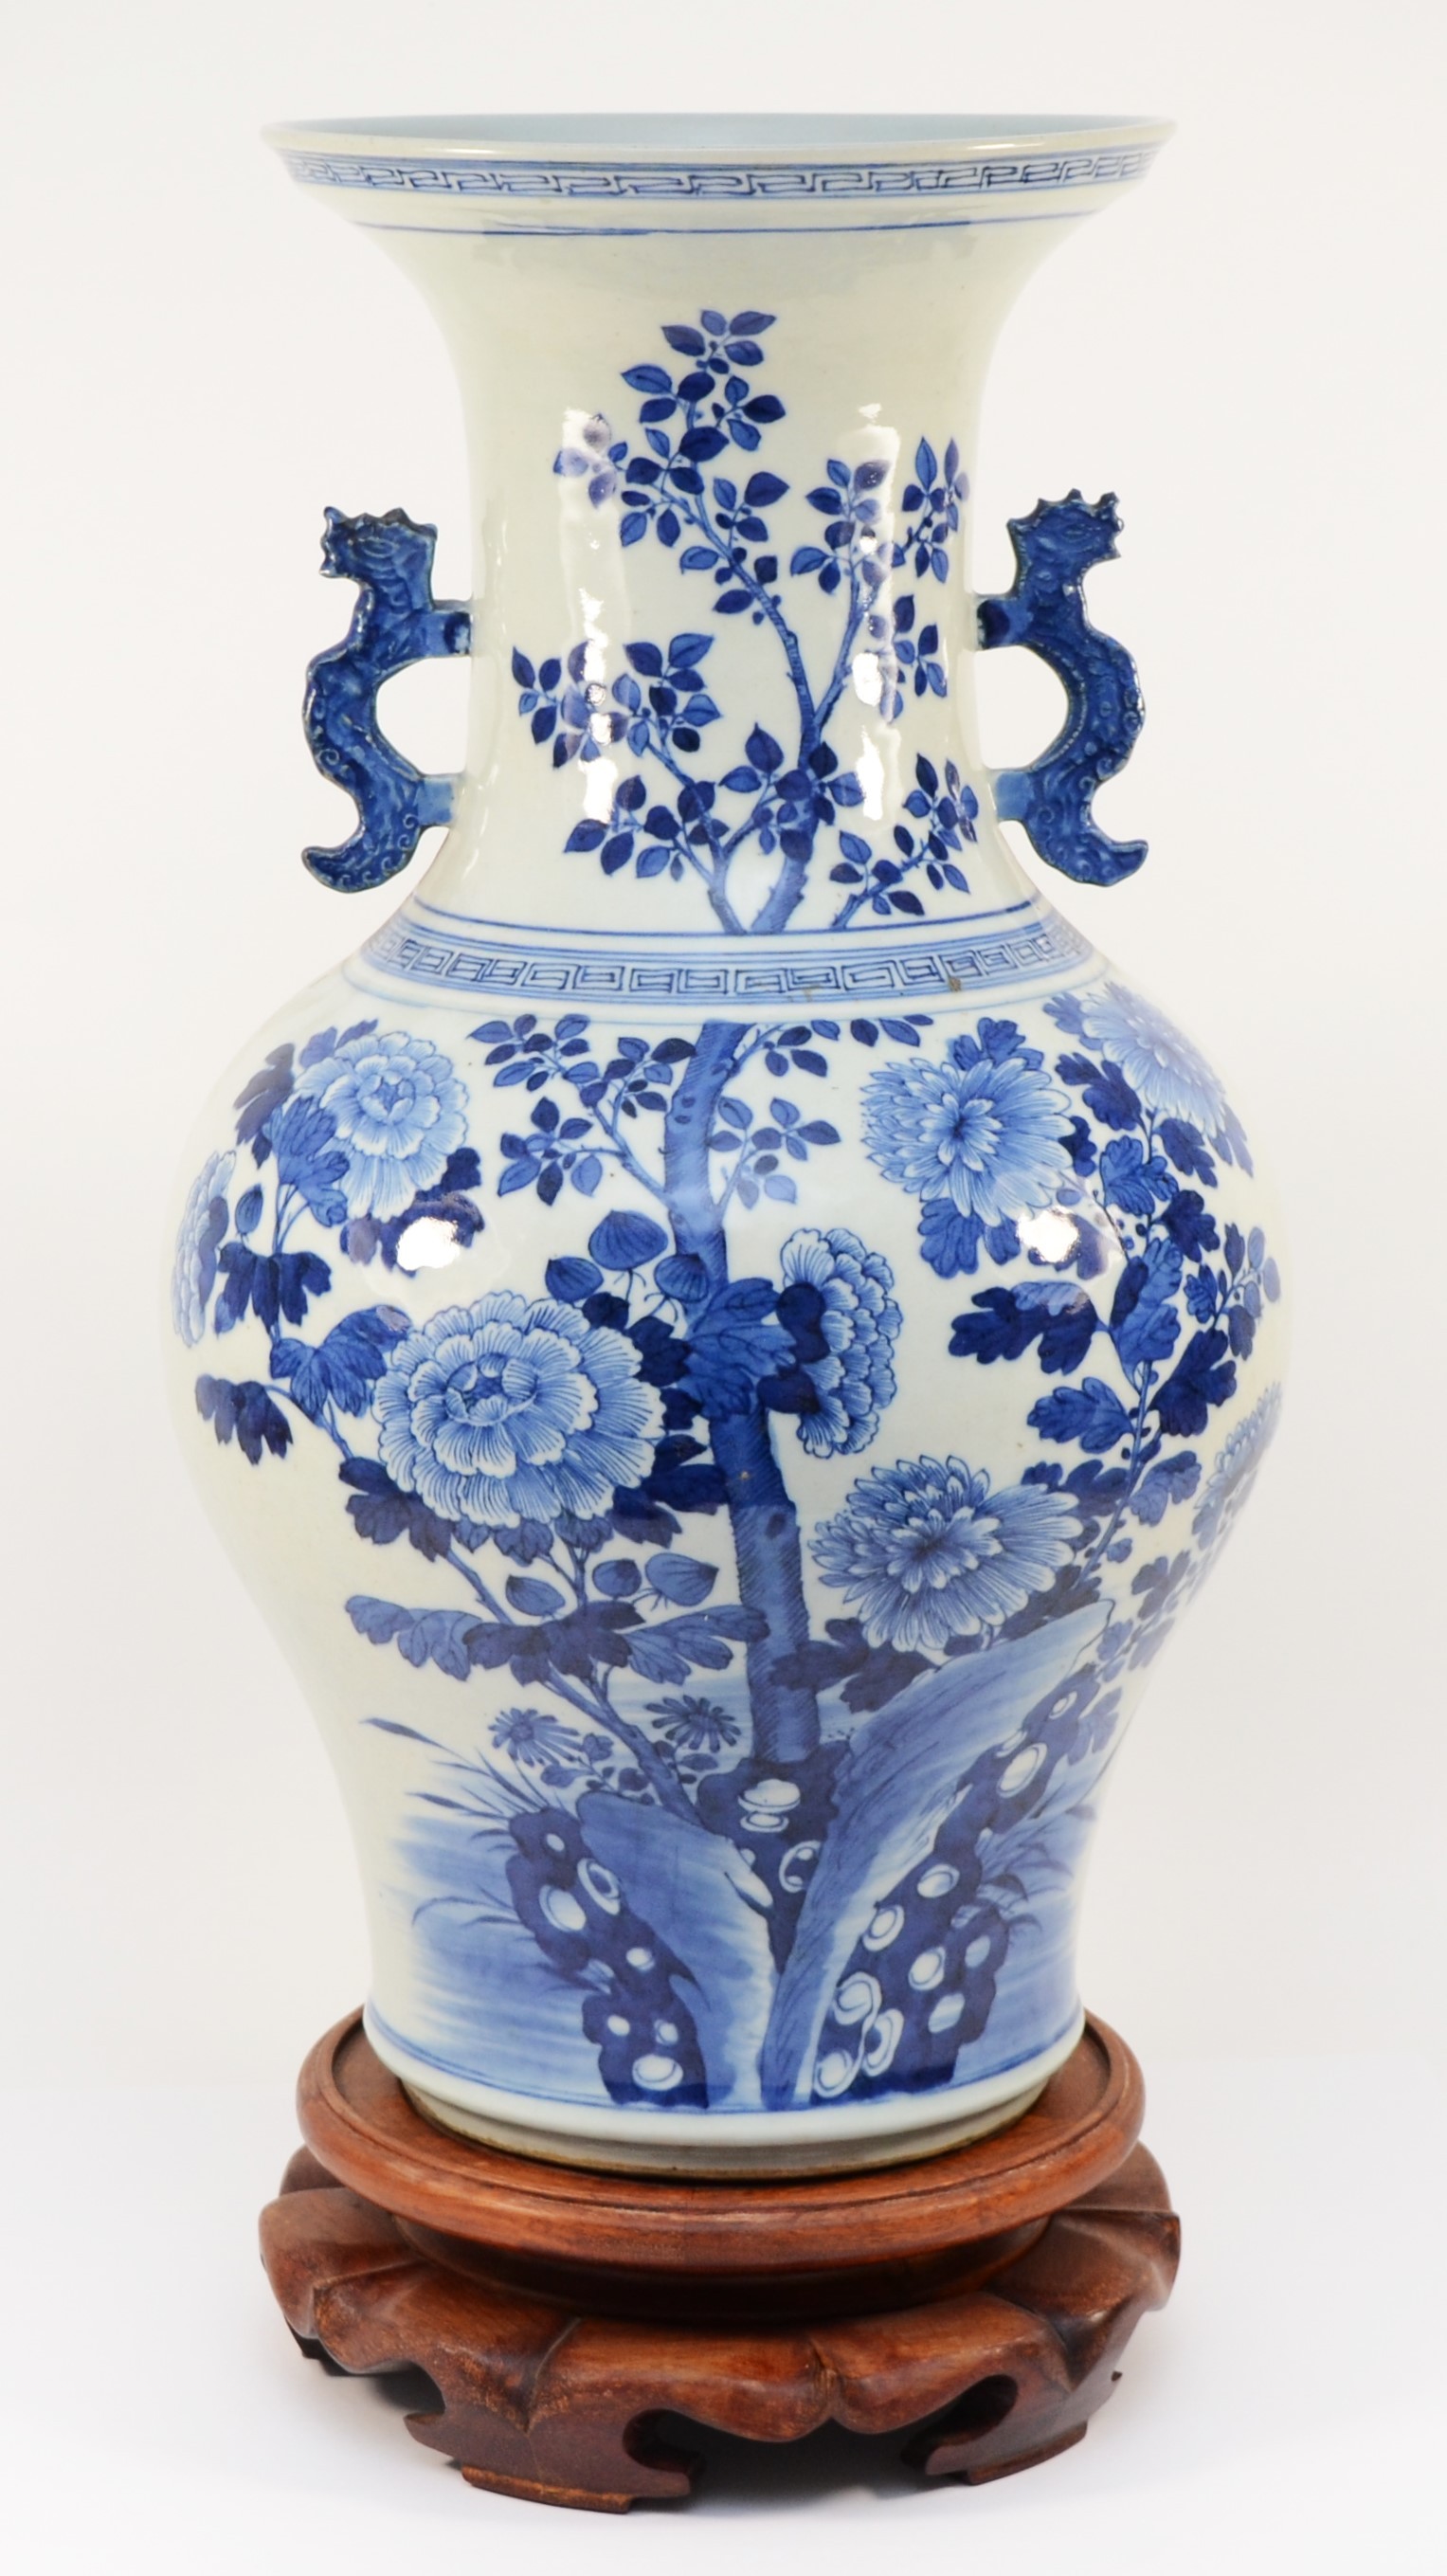 A large Chinese blue and white porcelain vase, circa 19th century Kangxi Dynasty, of baluster